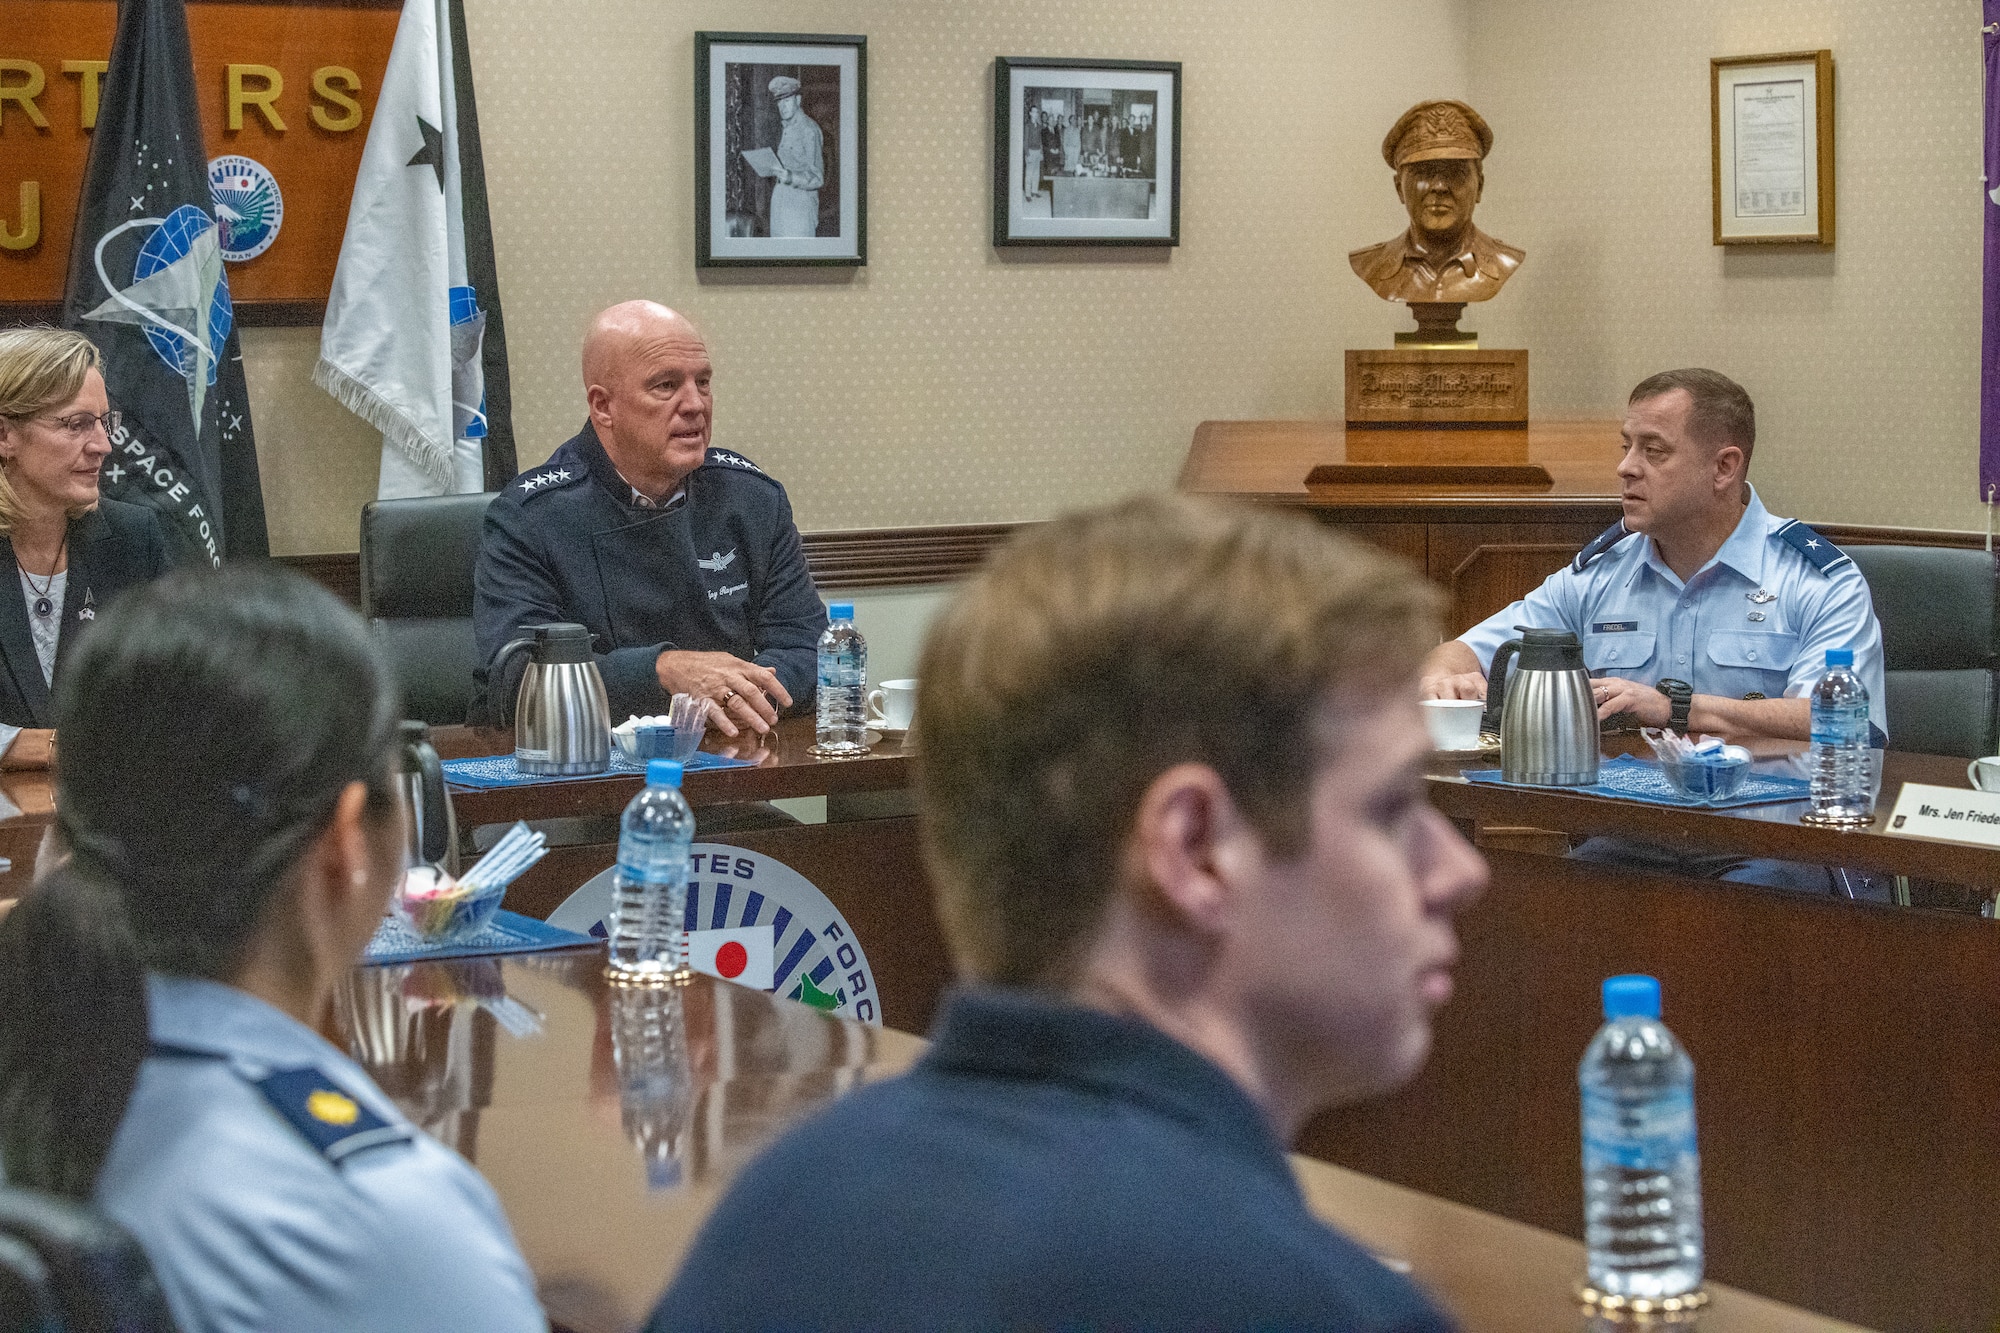 U.S. Space Force Gen. John "Jay" Raymond, Chief of Space
Operations, left, meets with U.S. Forces Japan officials at Yokota Air Base, Japan, Oct. 4, 2022. During his visit, Raymond met with senior leaders, toured the base and met with Guardians assigned to the 374th Airlift Wing. (U.S. Air Force photo by Staff Sgt. Jessica Avallone)